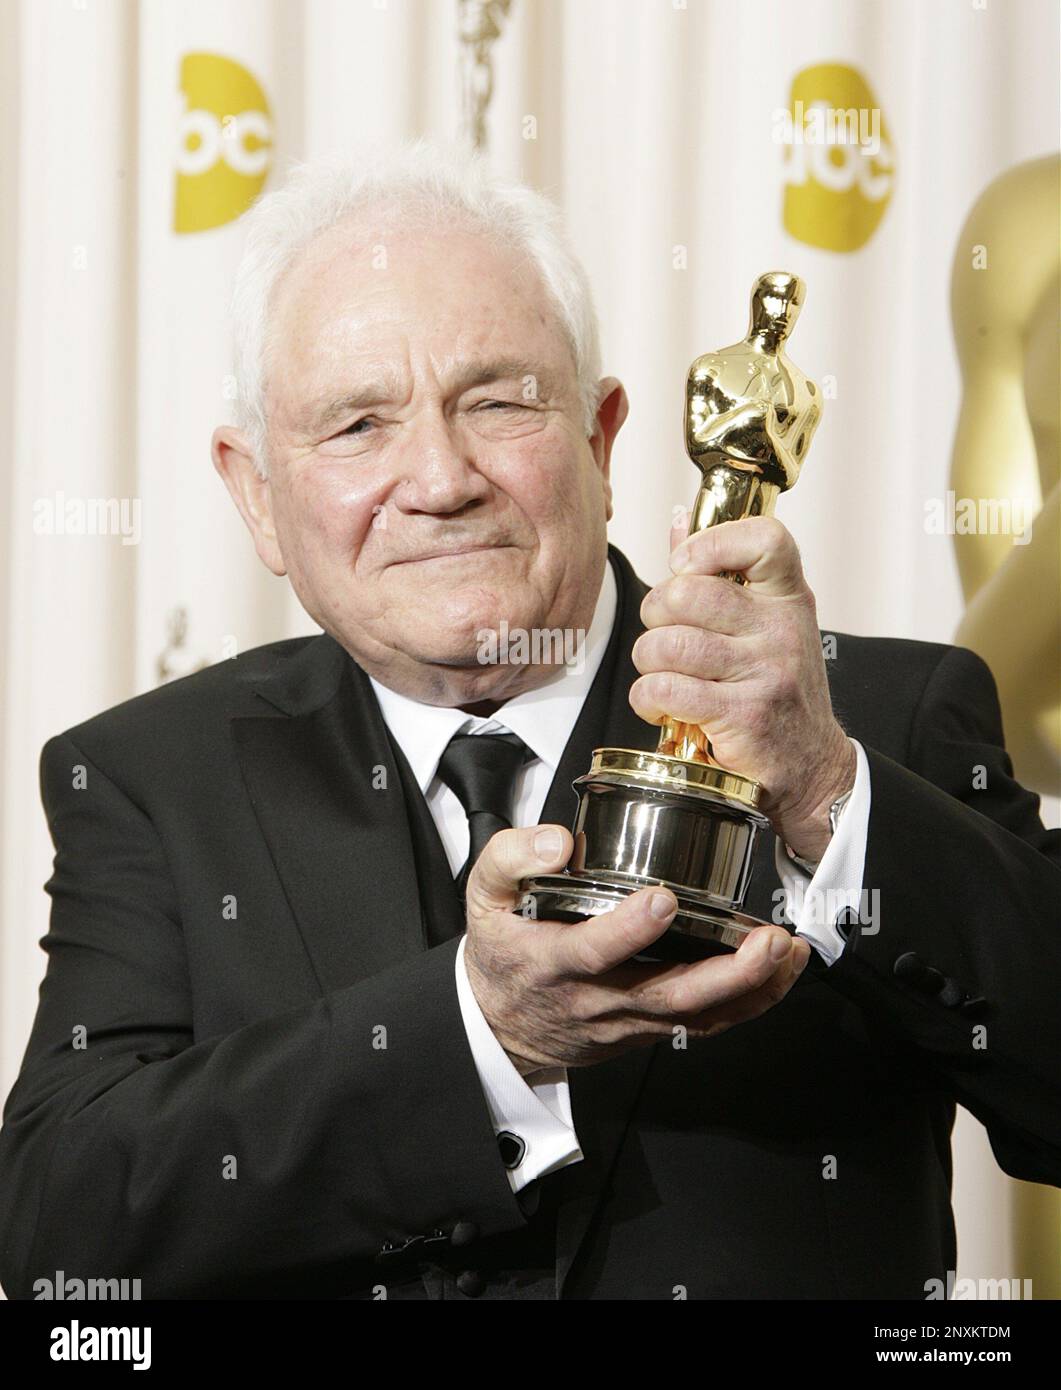 Winner for Best Writing (Original Screenplay) for the movie The King's Speech, David Seidler, poses in the press room at the 83rd Annual Academy Awards held at the Kodak Theatre on February 27, 2011 in Hollywood, California. Photo by Francis Specker Stock Photo